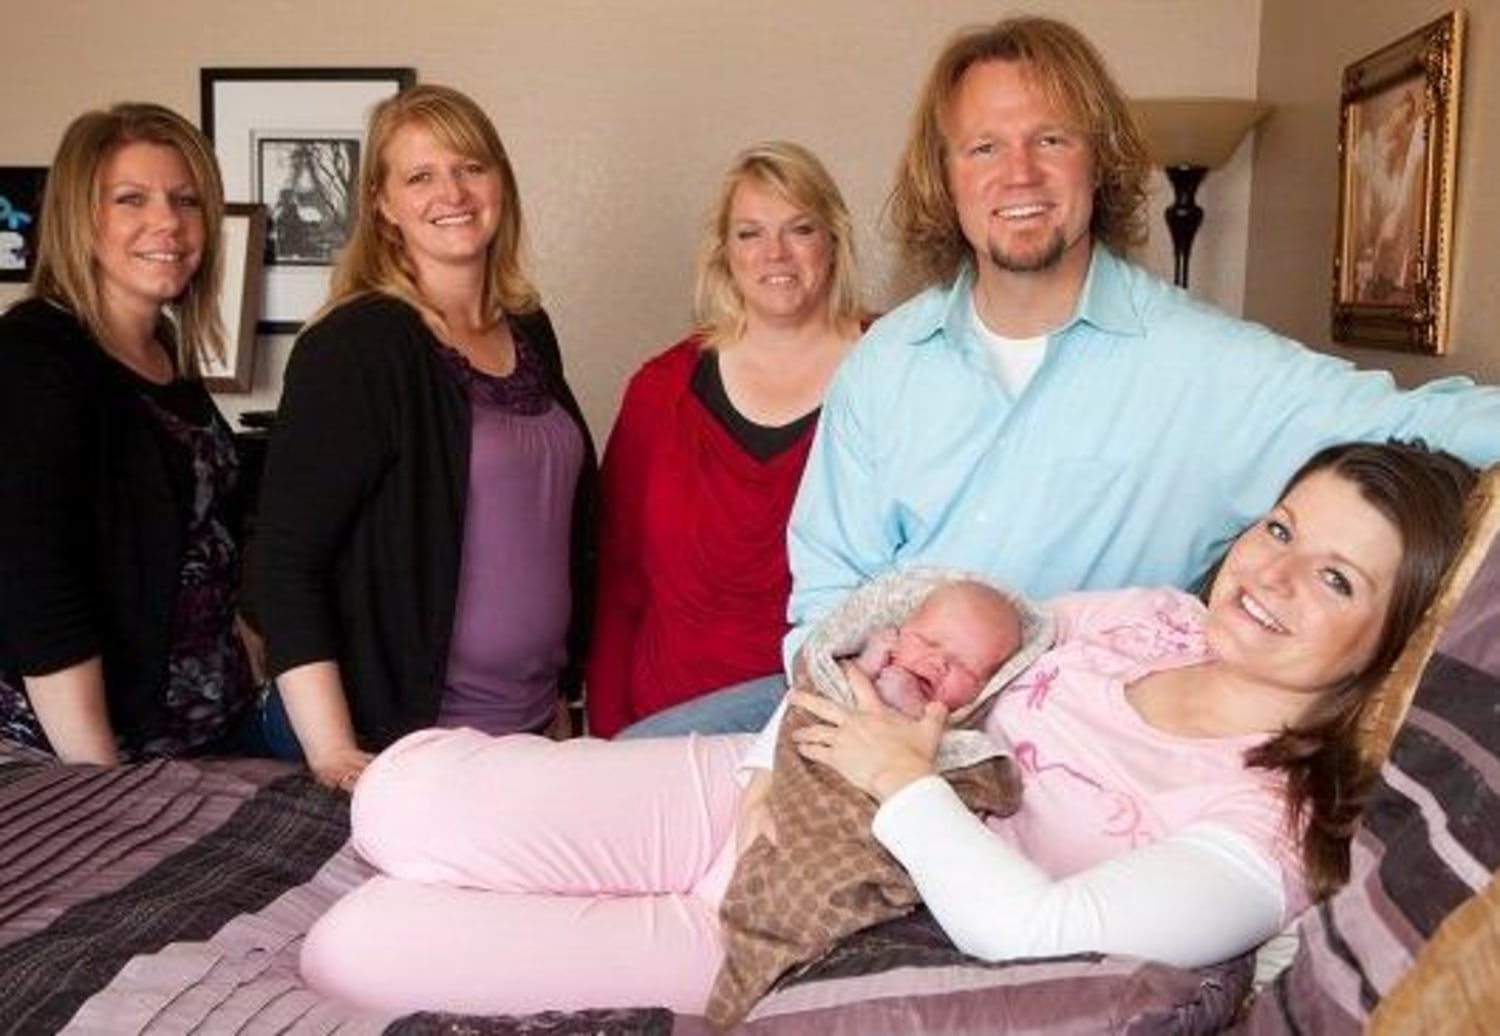 Meet the newest member of the Sister Wives family image